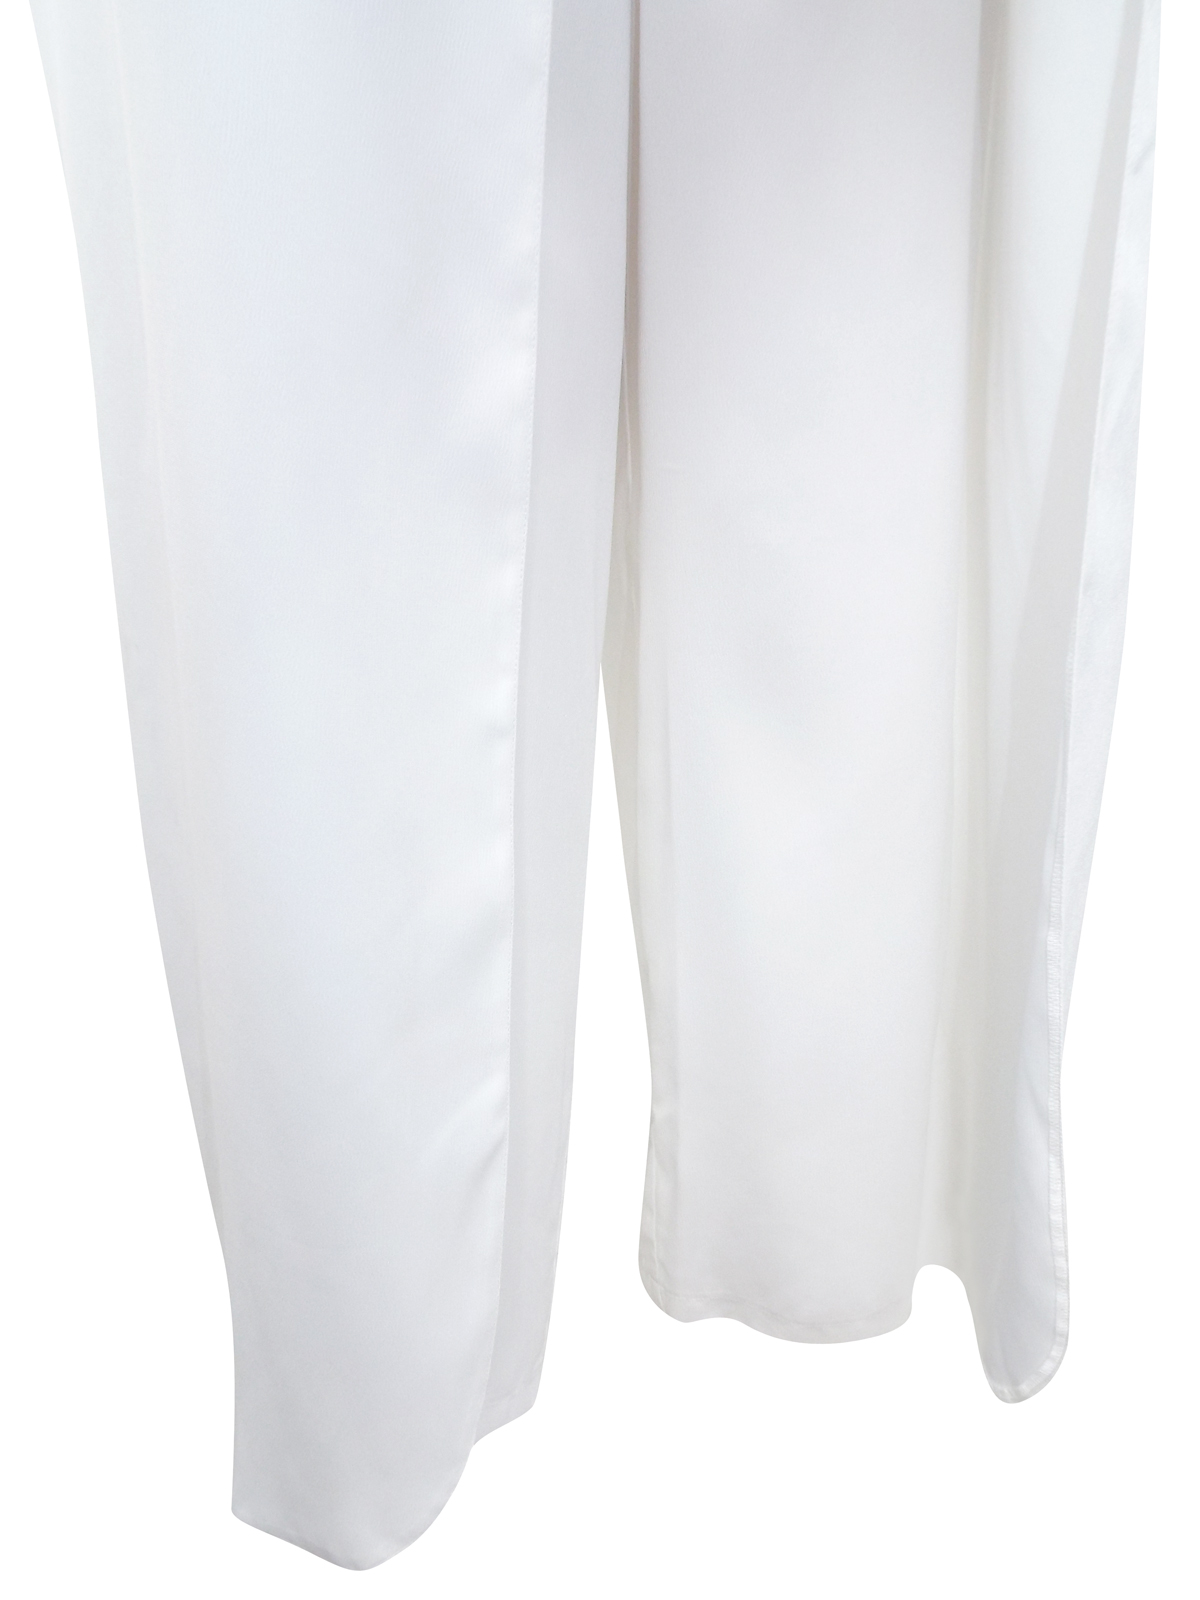 3vans WHITE Overlay Wide Leg Trousers - Plus Size 16 to 28